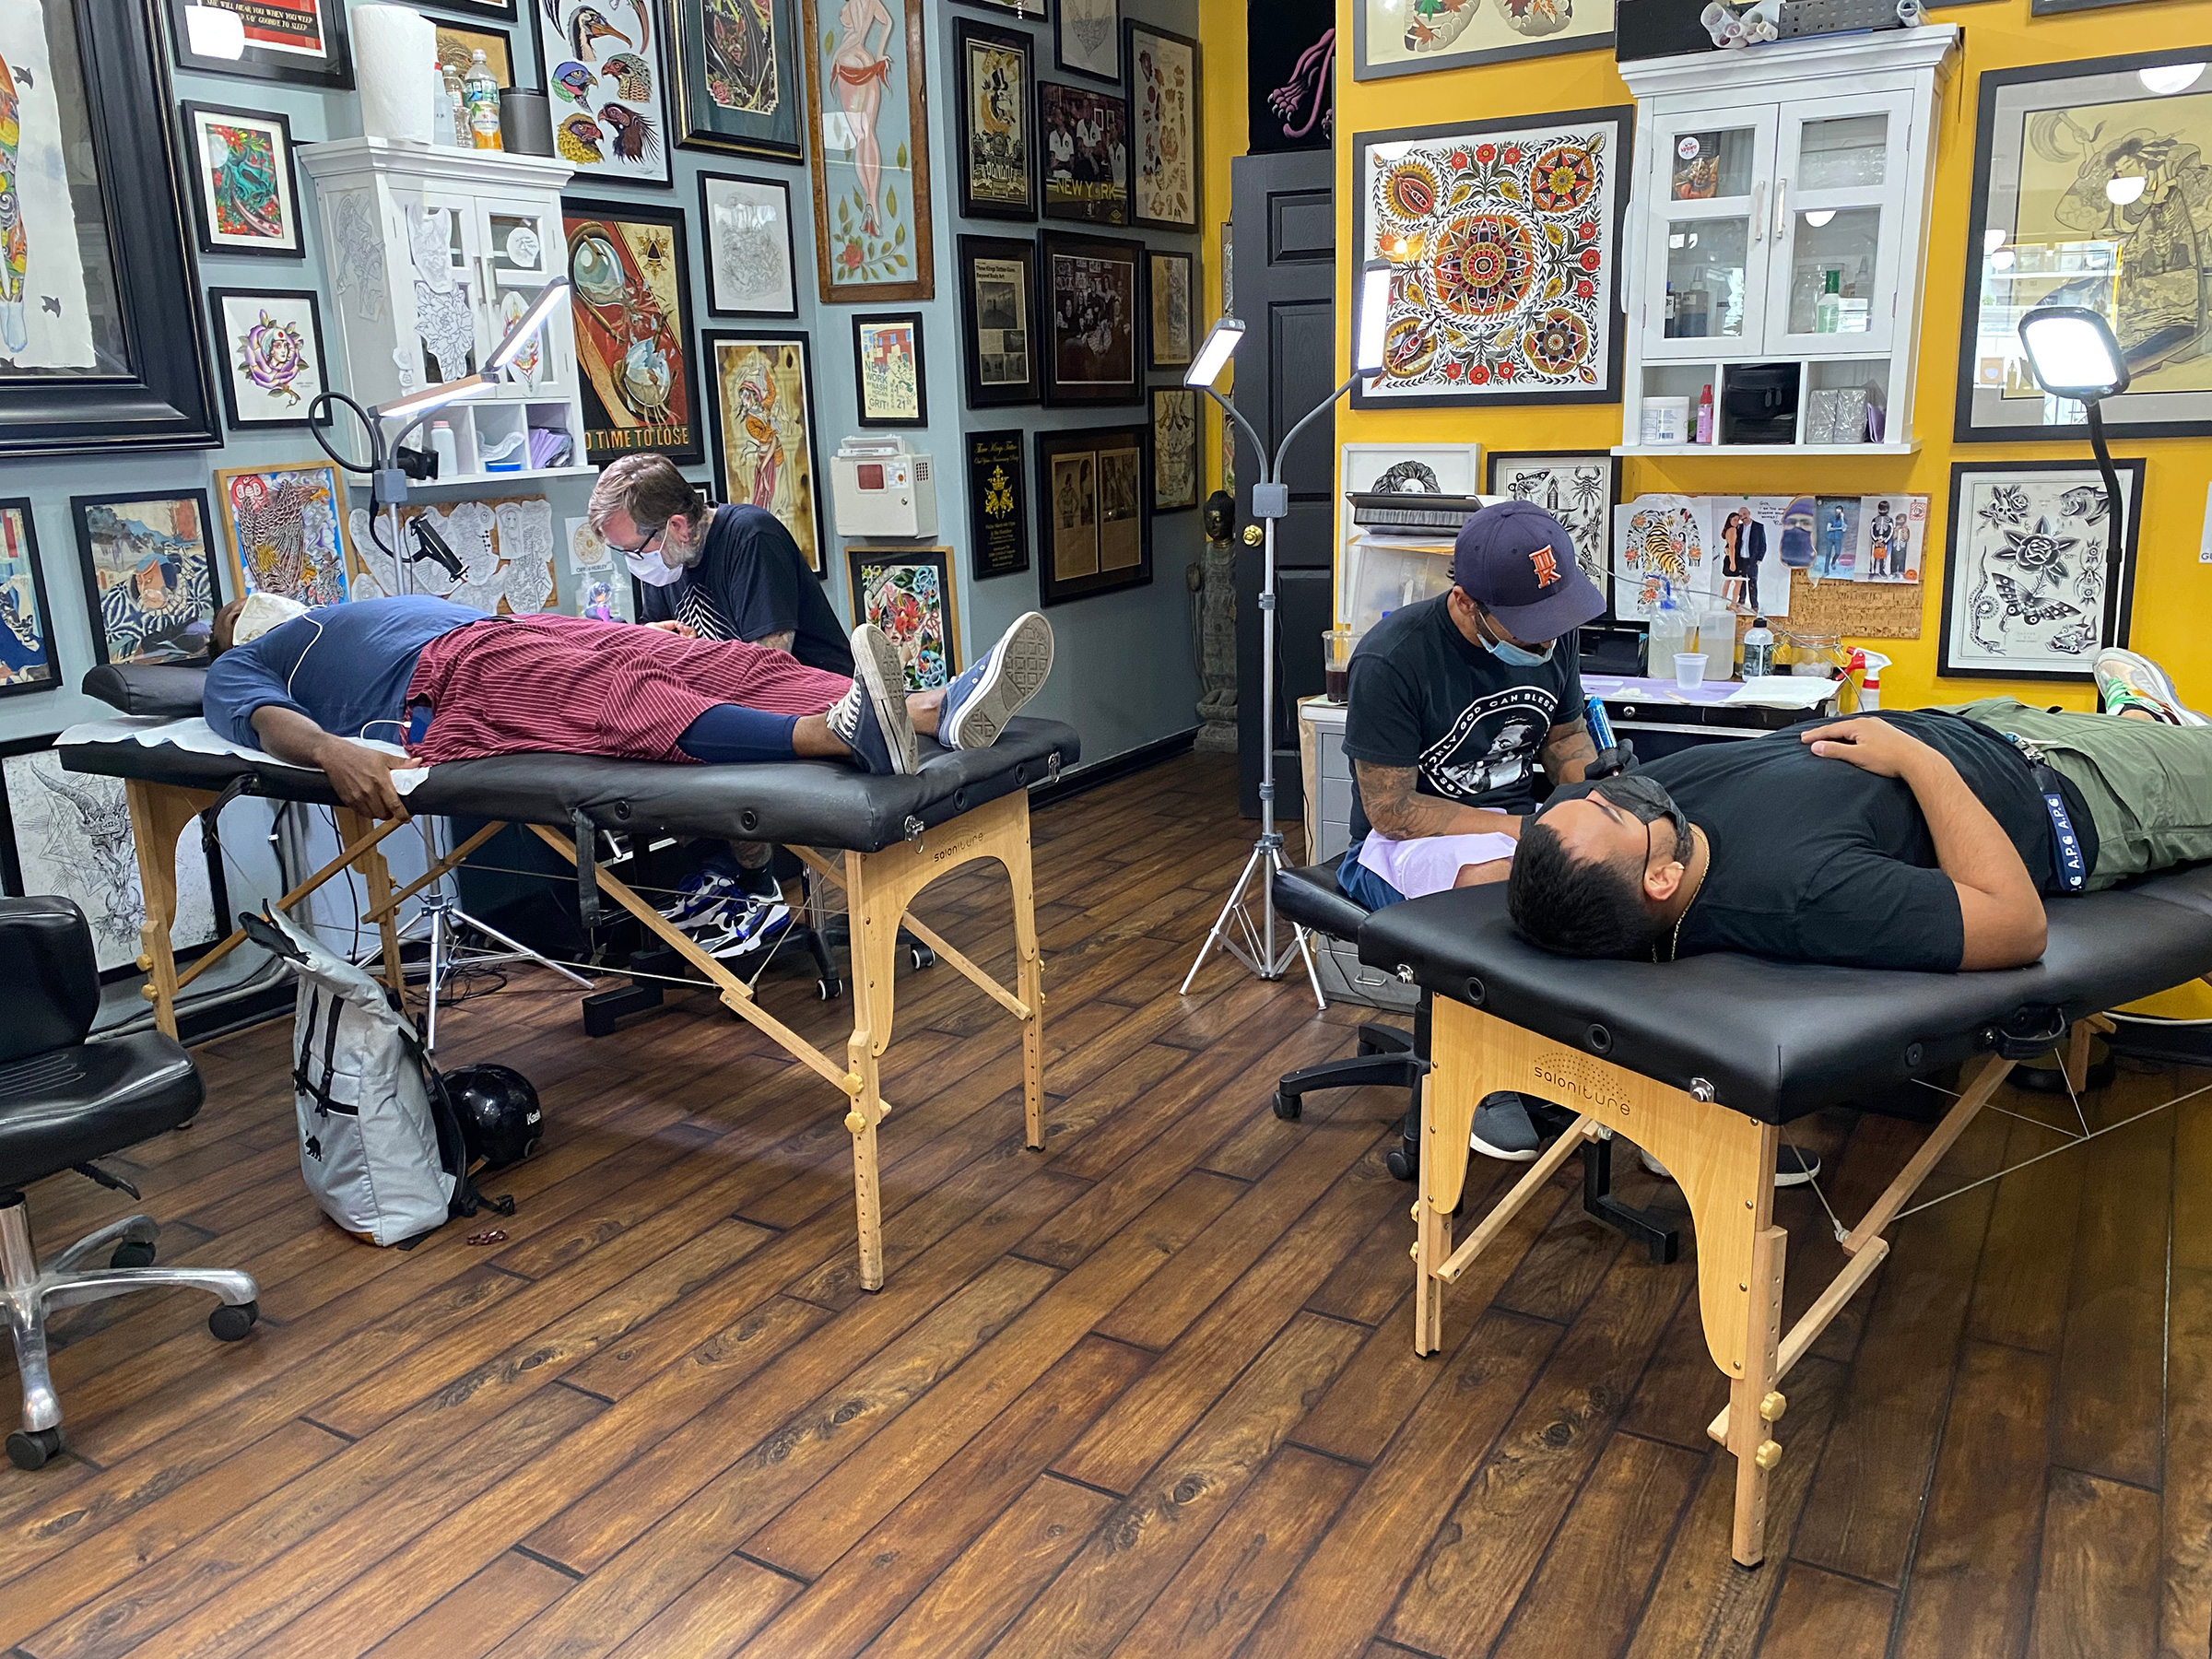 Tattoo Studios Are Booming While Other Businesses Struggle